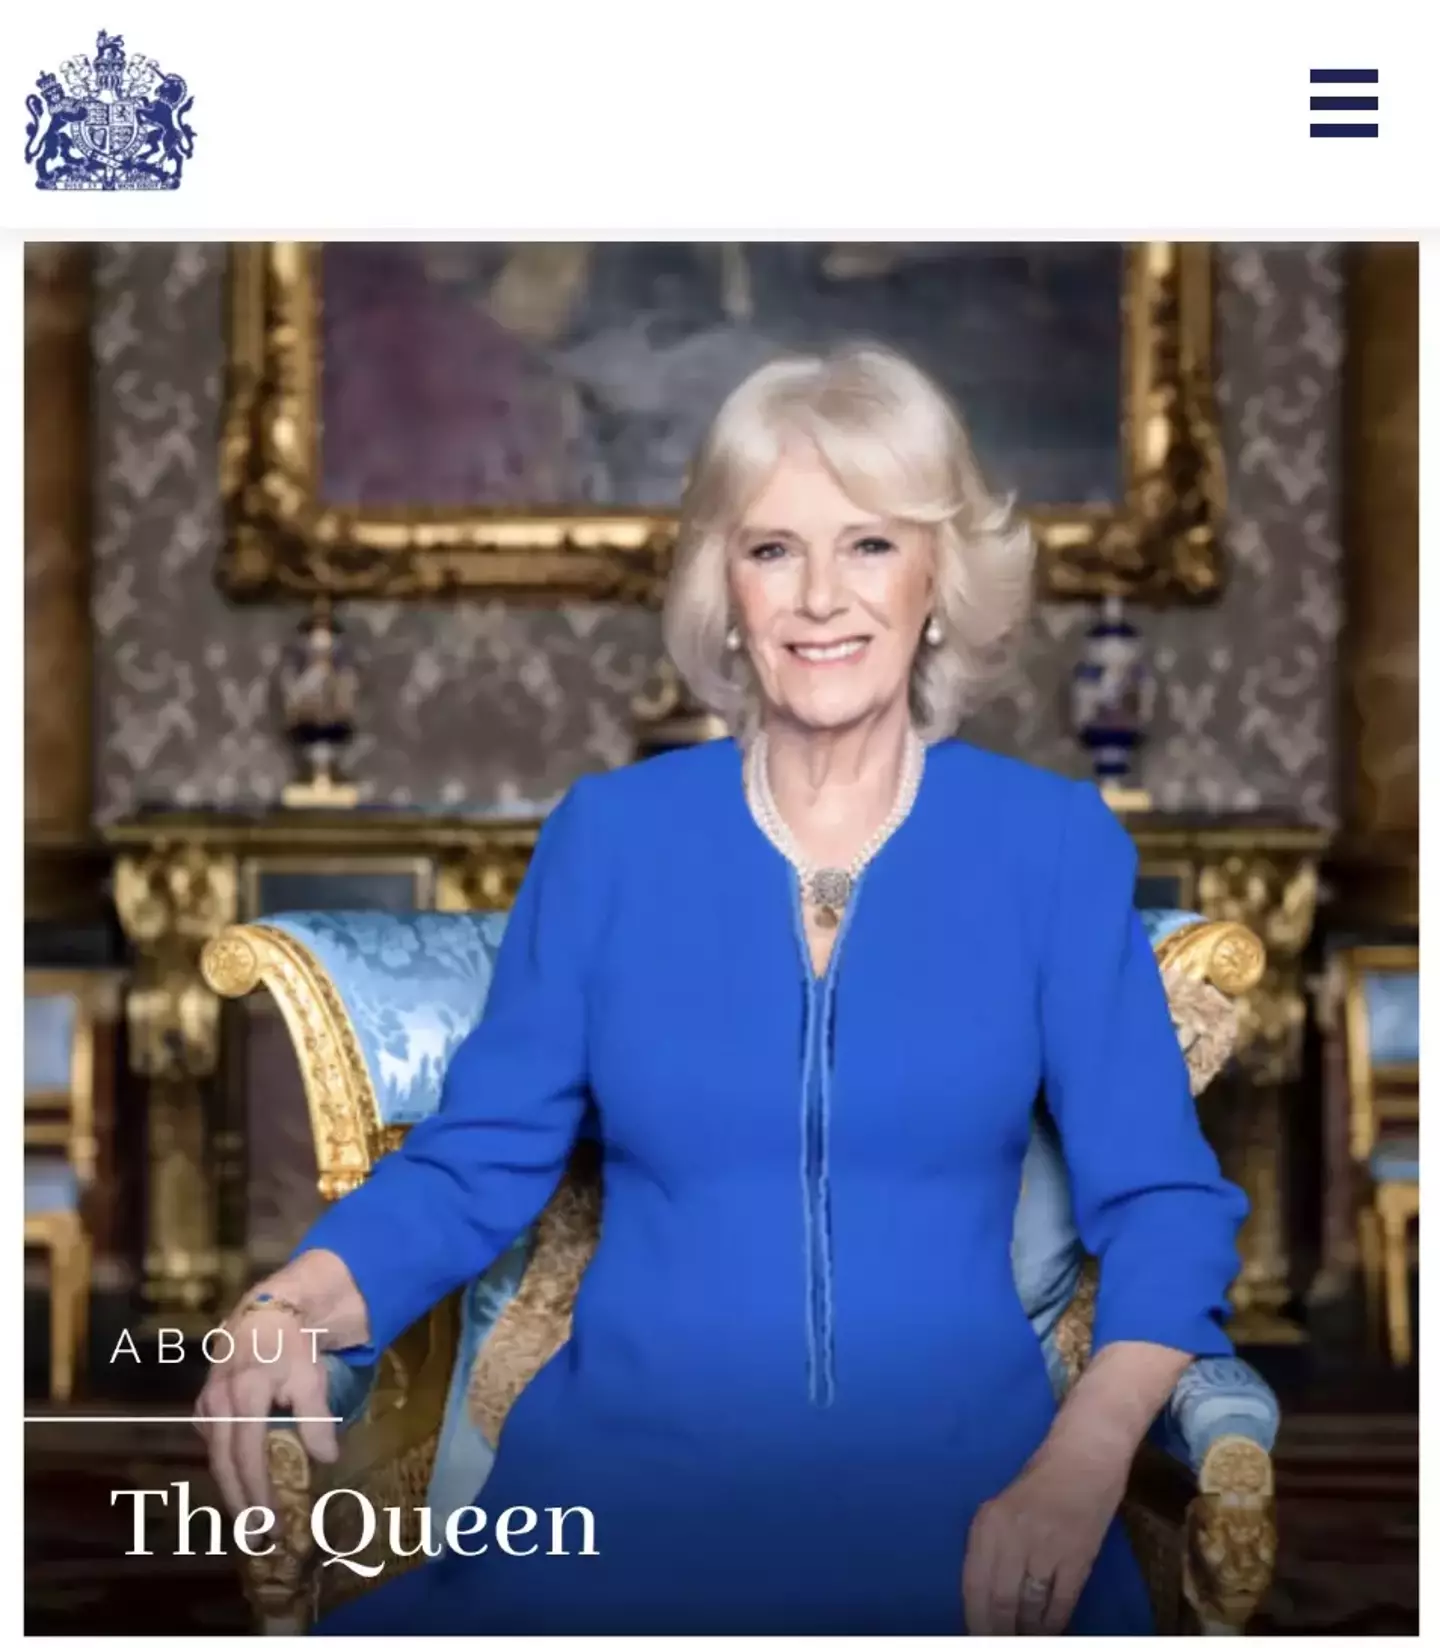 Camilla will now officially go by Queen Camilla.